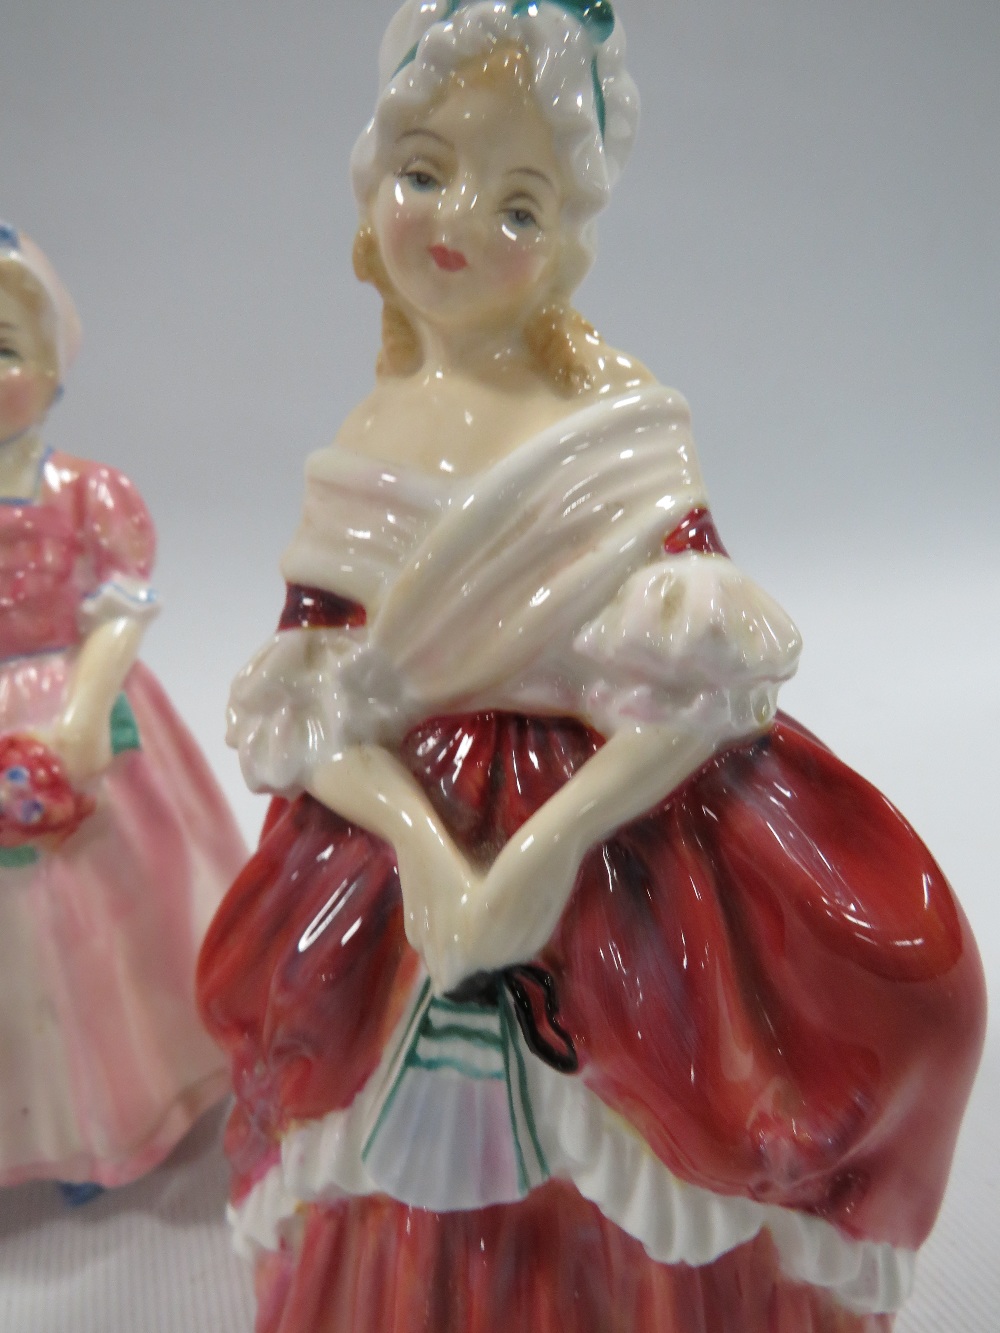 FOUR SMALL ROYAL DOULTON FIGURINES TO INCLUDE "CISSIE" - Image 2 of 7